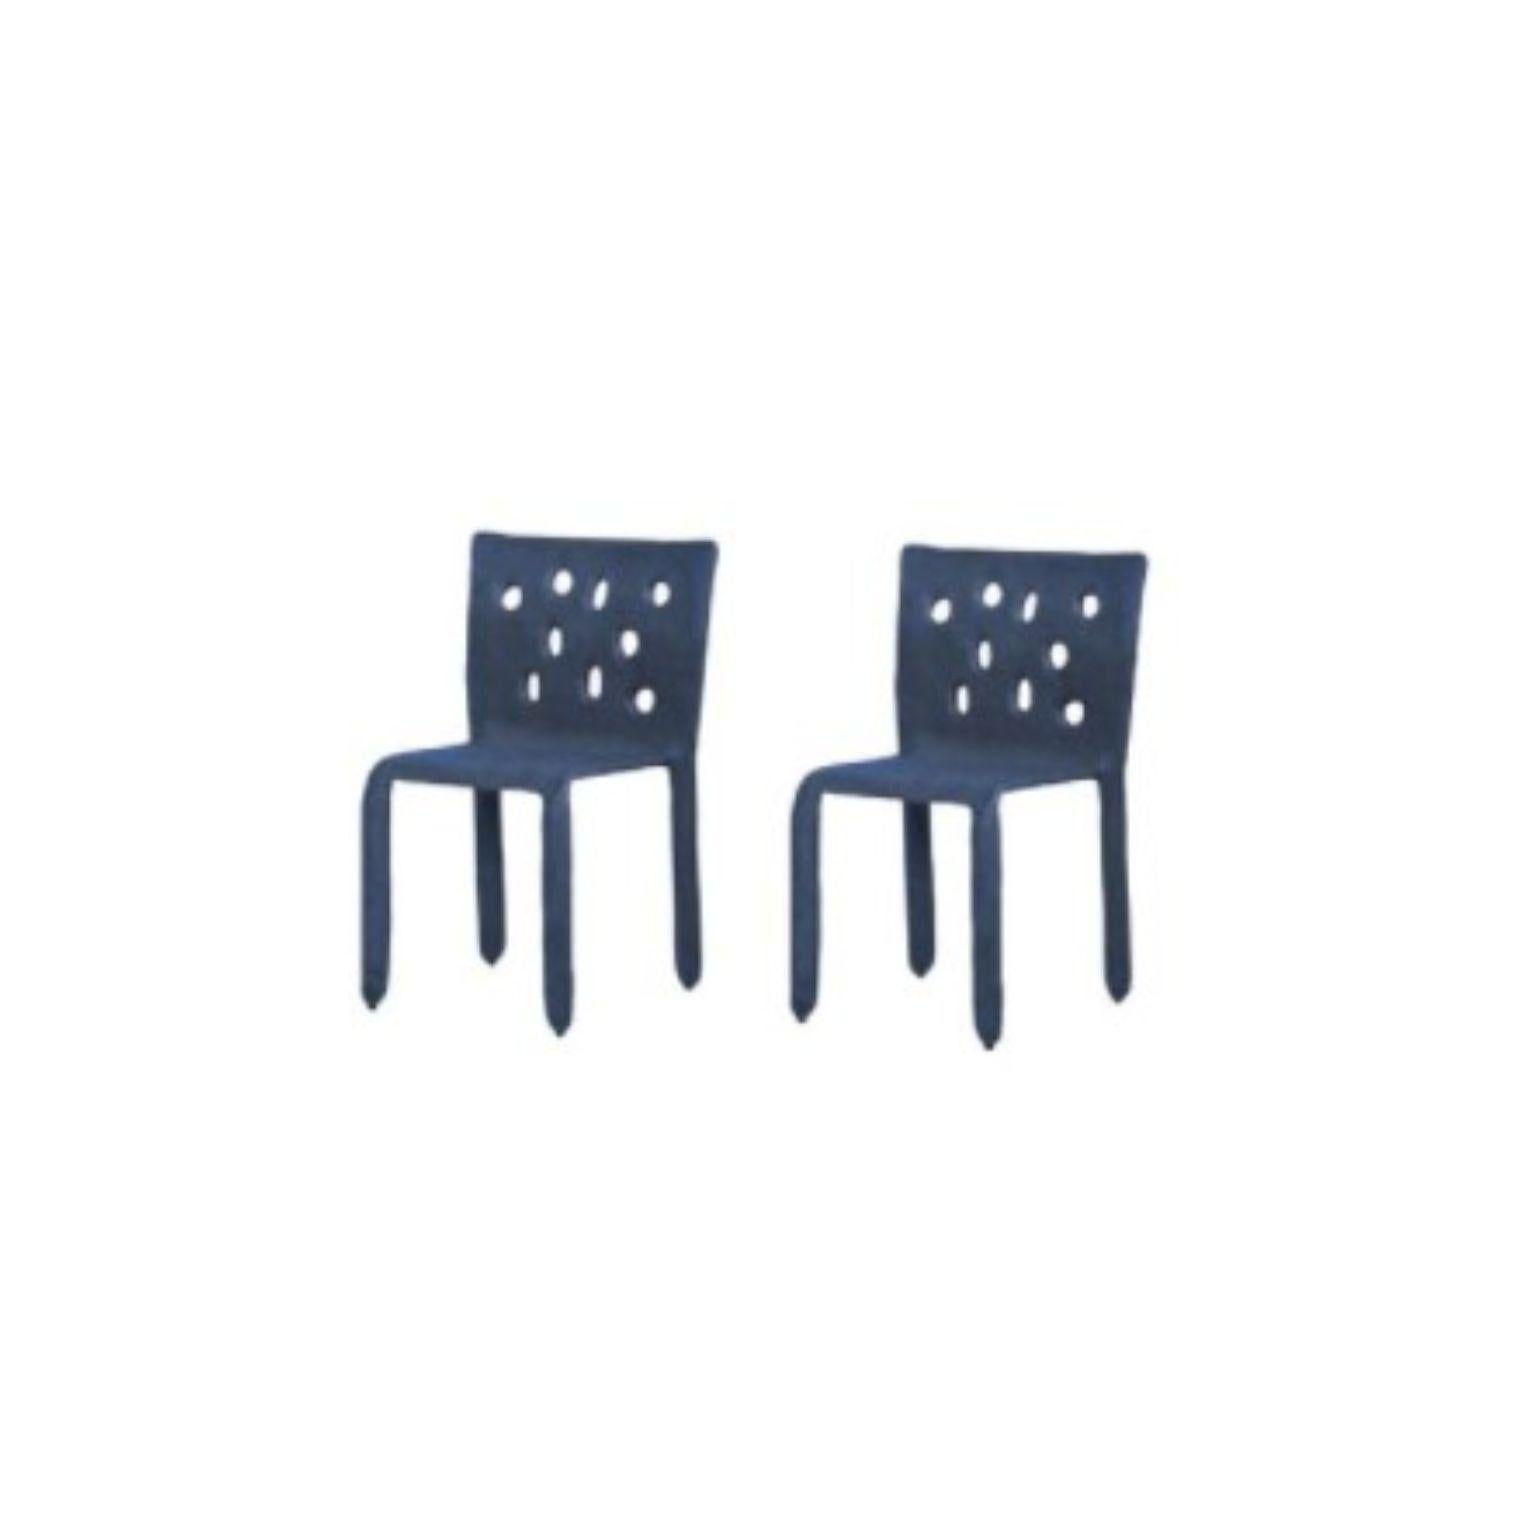 Set of 2 blue sculpted contemporary chairs by FAINA
Design: Victoriya Yakusha
Material: steel, flax rubber, biopolymer, cellulose
Dimensions: Height 82 x width 54 x legs depth 45 cm
 Weight: 15 kilos.

Indoor finish available

Made in the